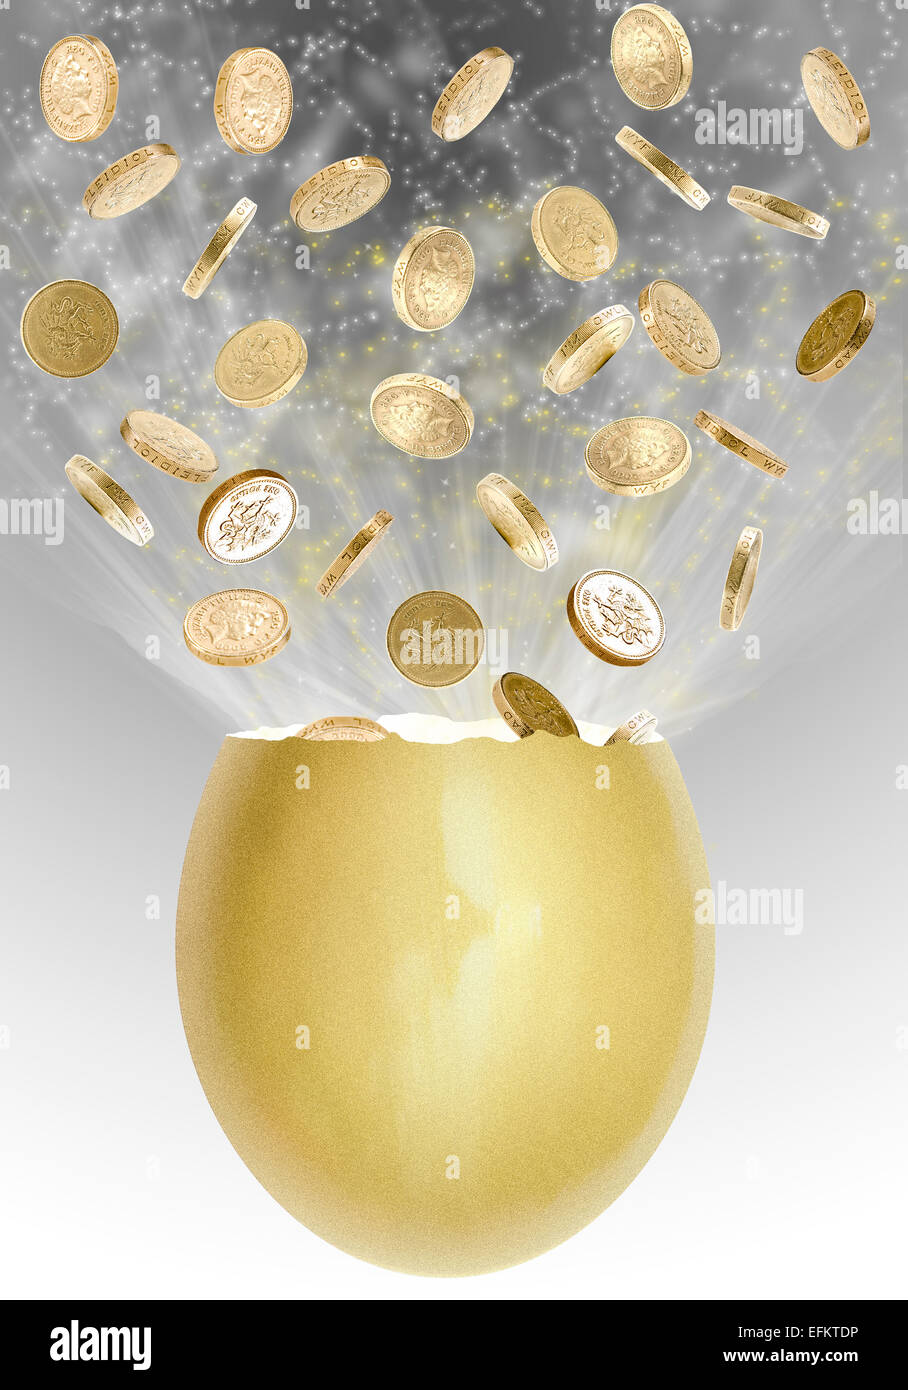 money, pound coins exploding from golden egg. Financial payout jackpot concept. Stock Photo